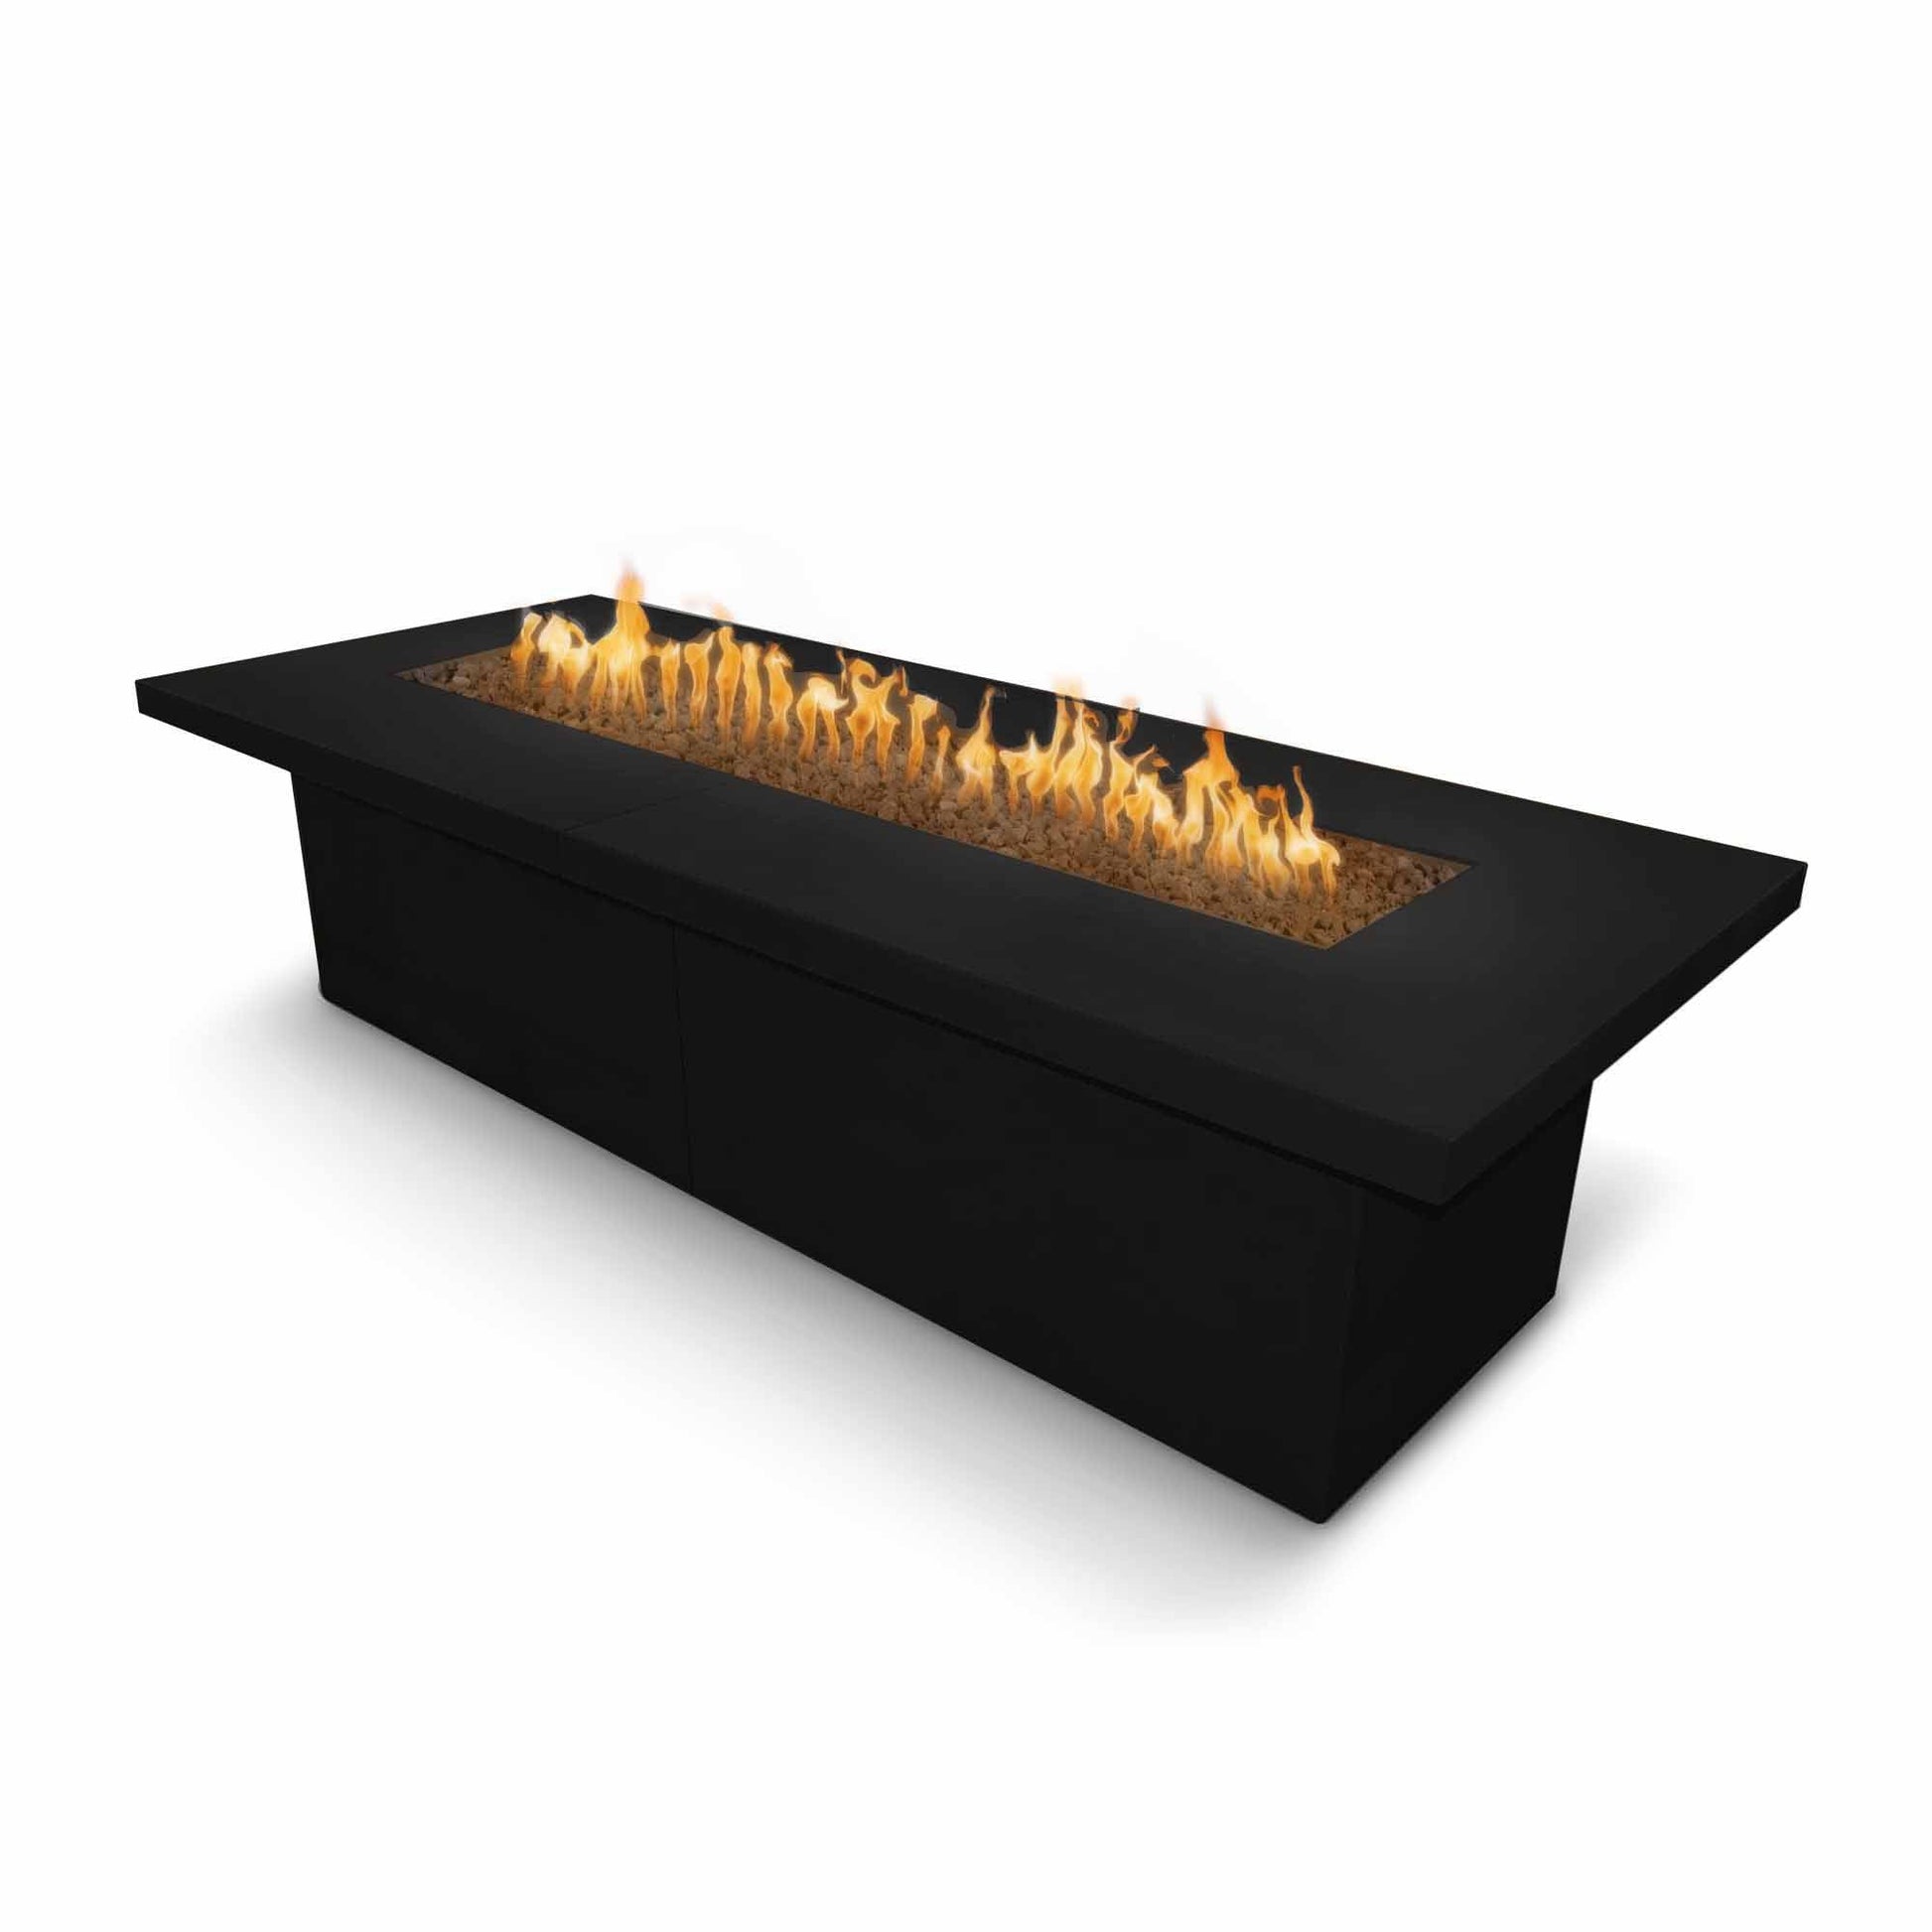 The Outdoor Plus Rectangular Newport 72" Copper Vein Powder Coated Metal Liquid Propane Fire Pit with 12V Electronic Ignition